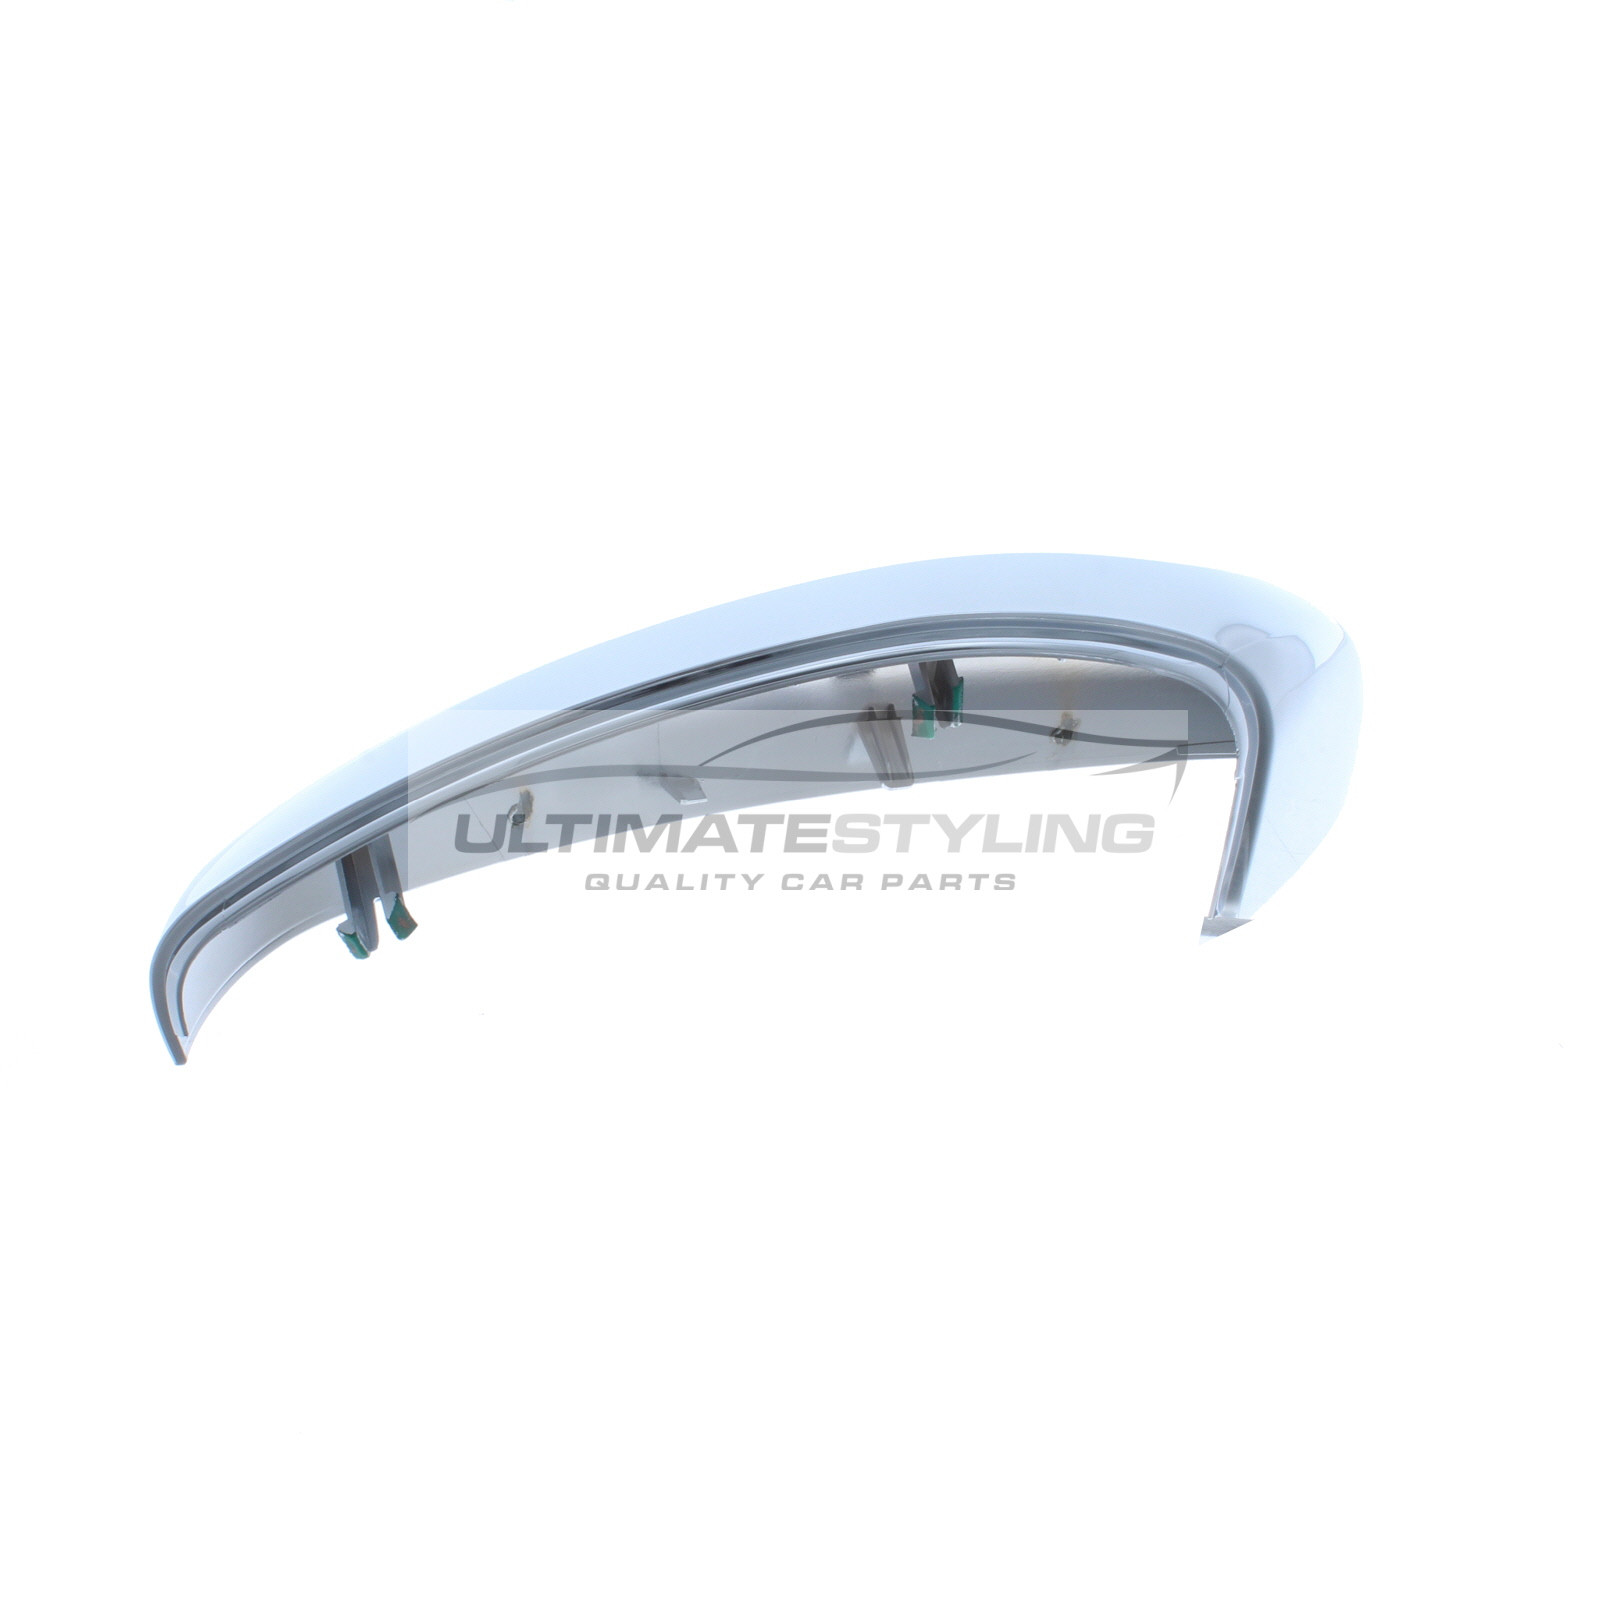 Peugeot 208 2012 - 2019 Wing Mirror Cover RH or LH In Chrome